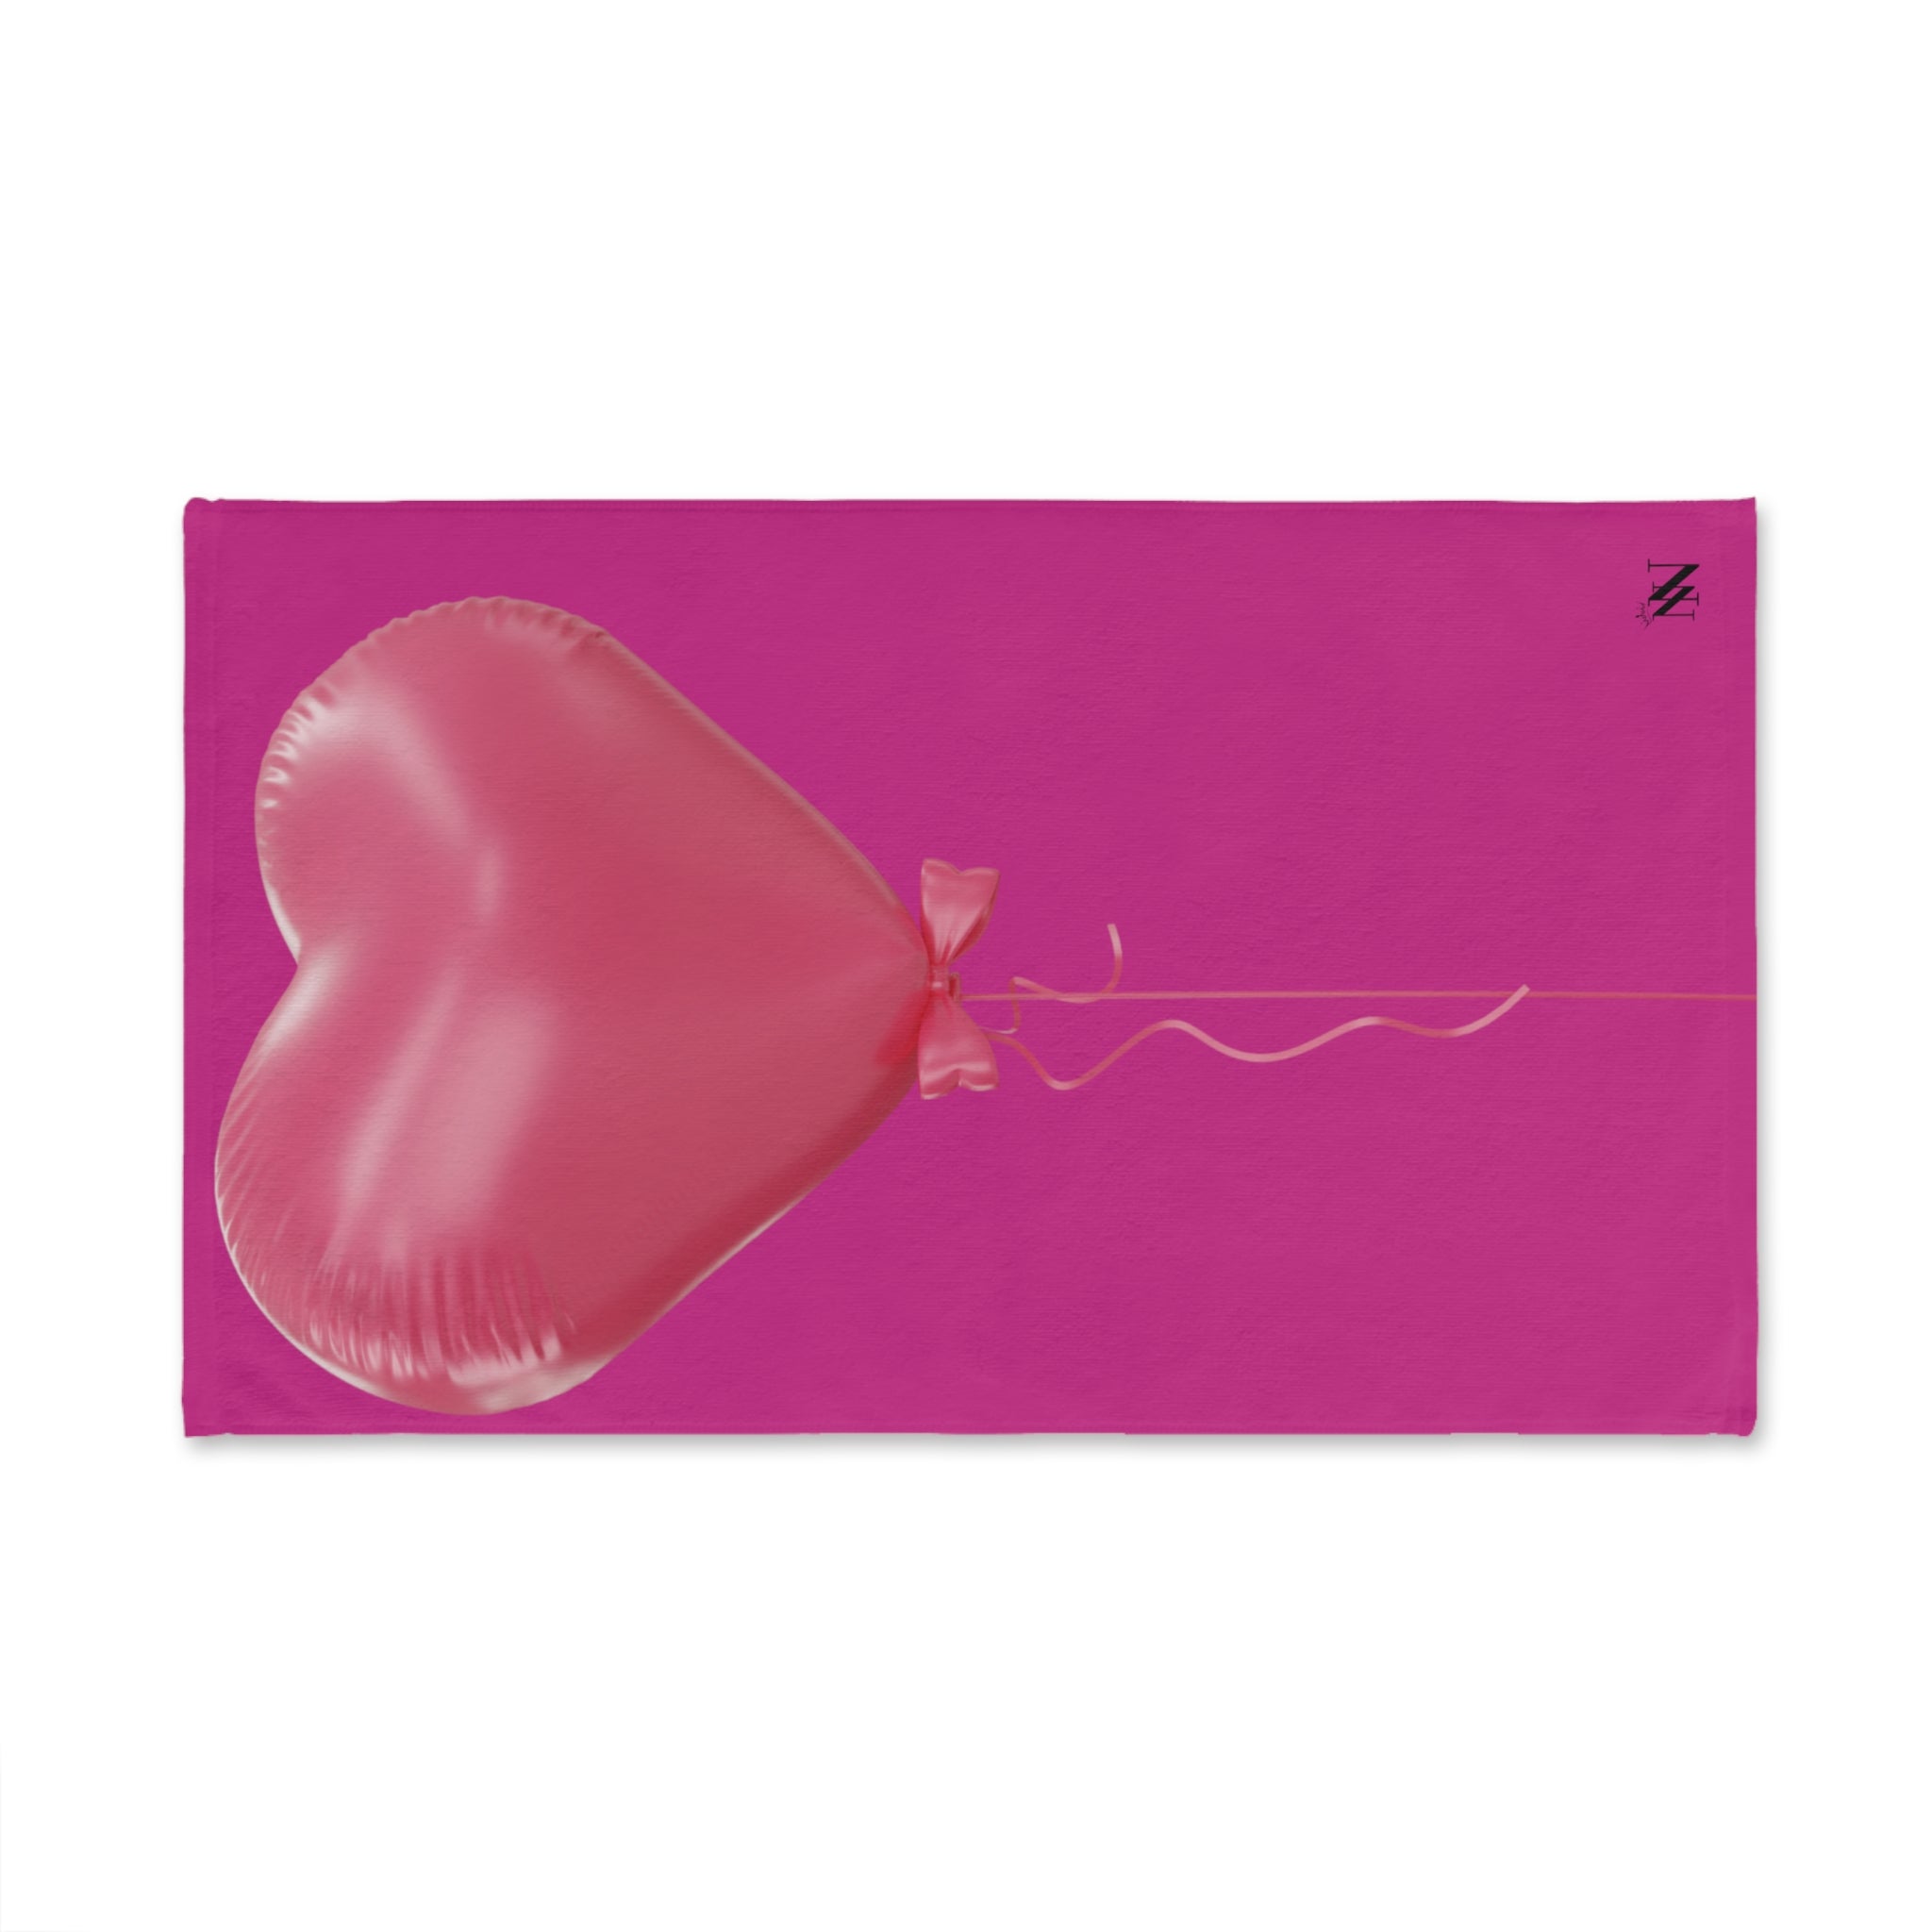 Pink 3D Heart Balloon Fuscia | Funny Gifts for Men - Gifts for Him - Birthday Gifts for Men, Him, Husband, Boyfriend, New Couple Gifts, Fathers & Valentines Day Gifts, Hand Towels NECTAR NAPKINS